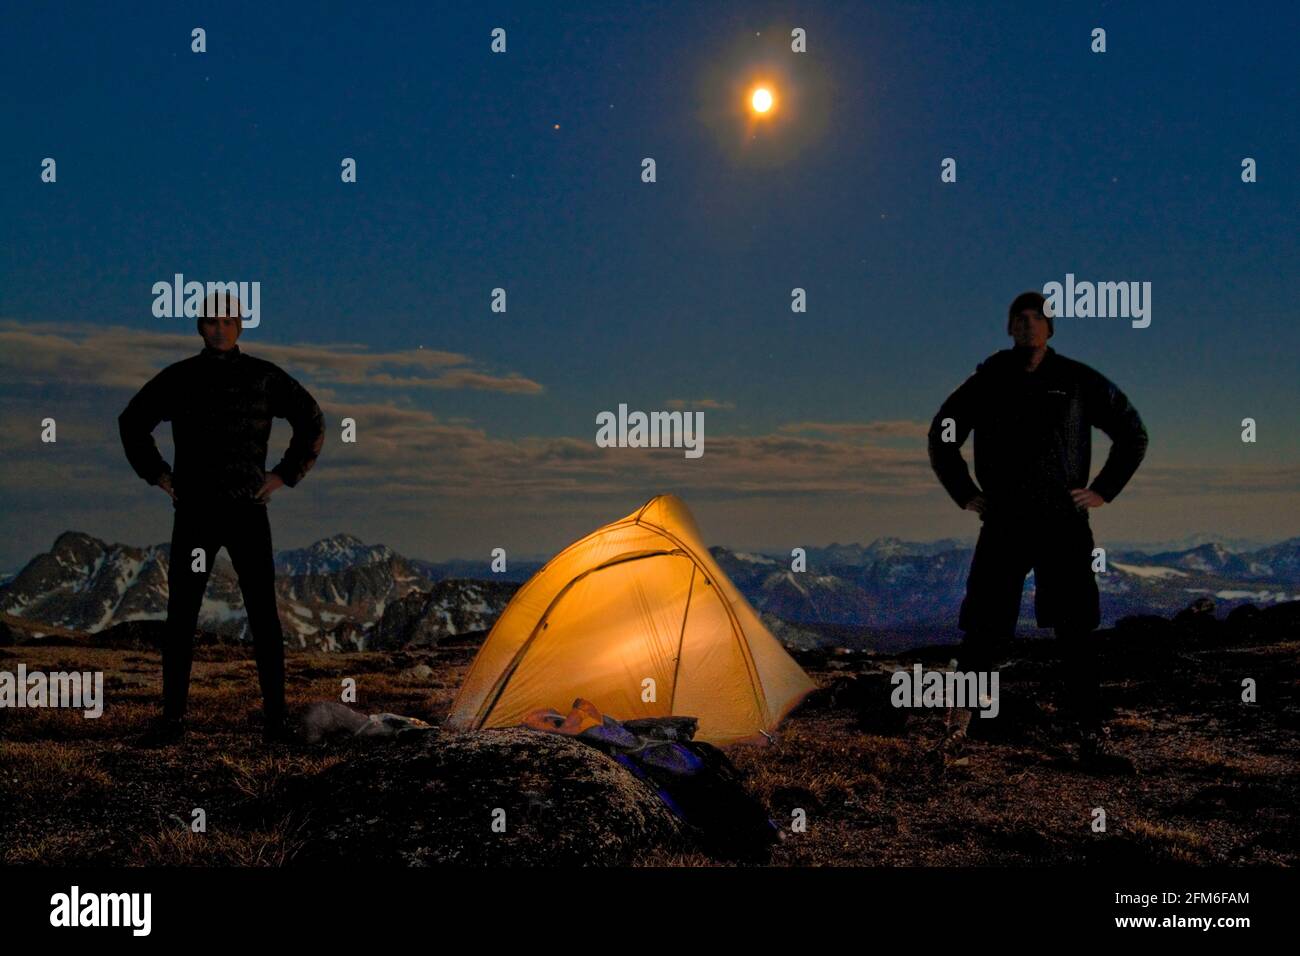 Two men stand next to their lit up tent on a mountain summit. Stock Photo